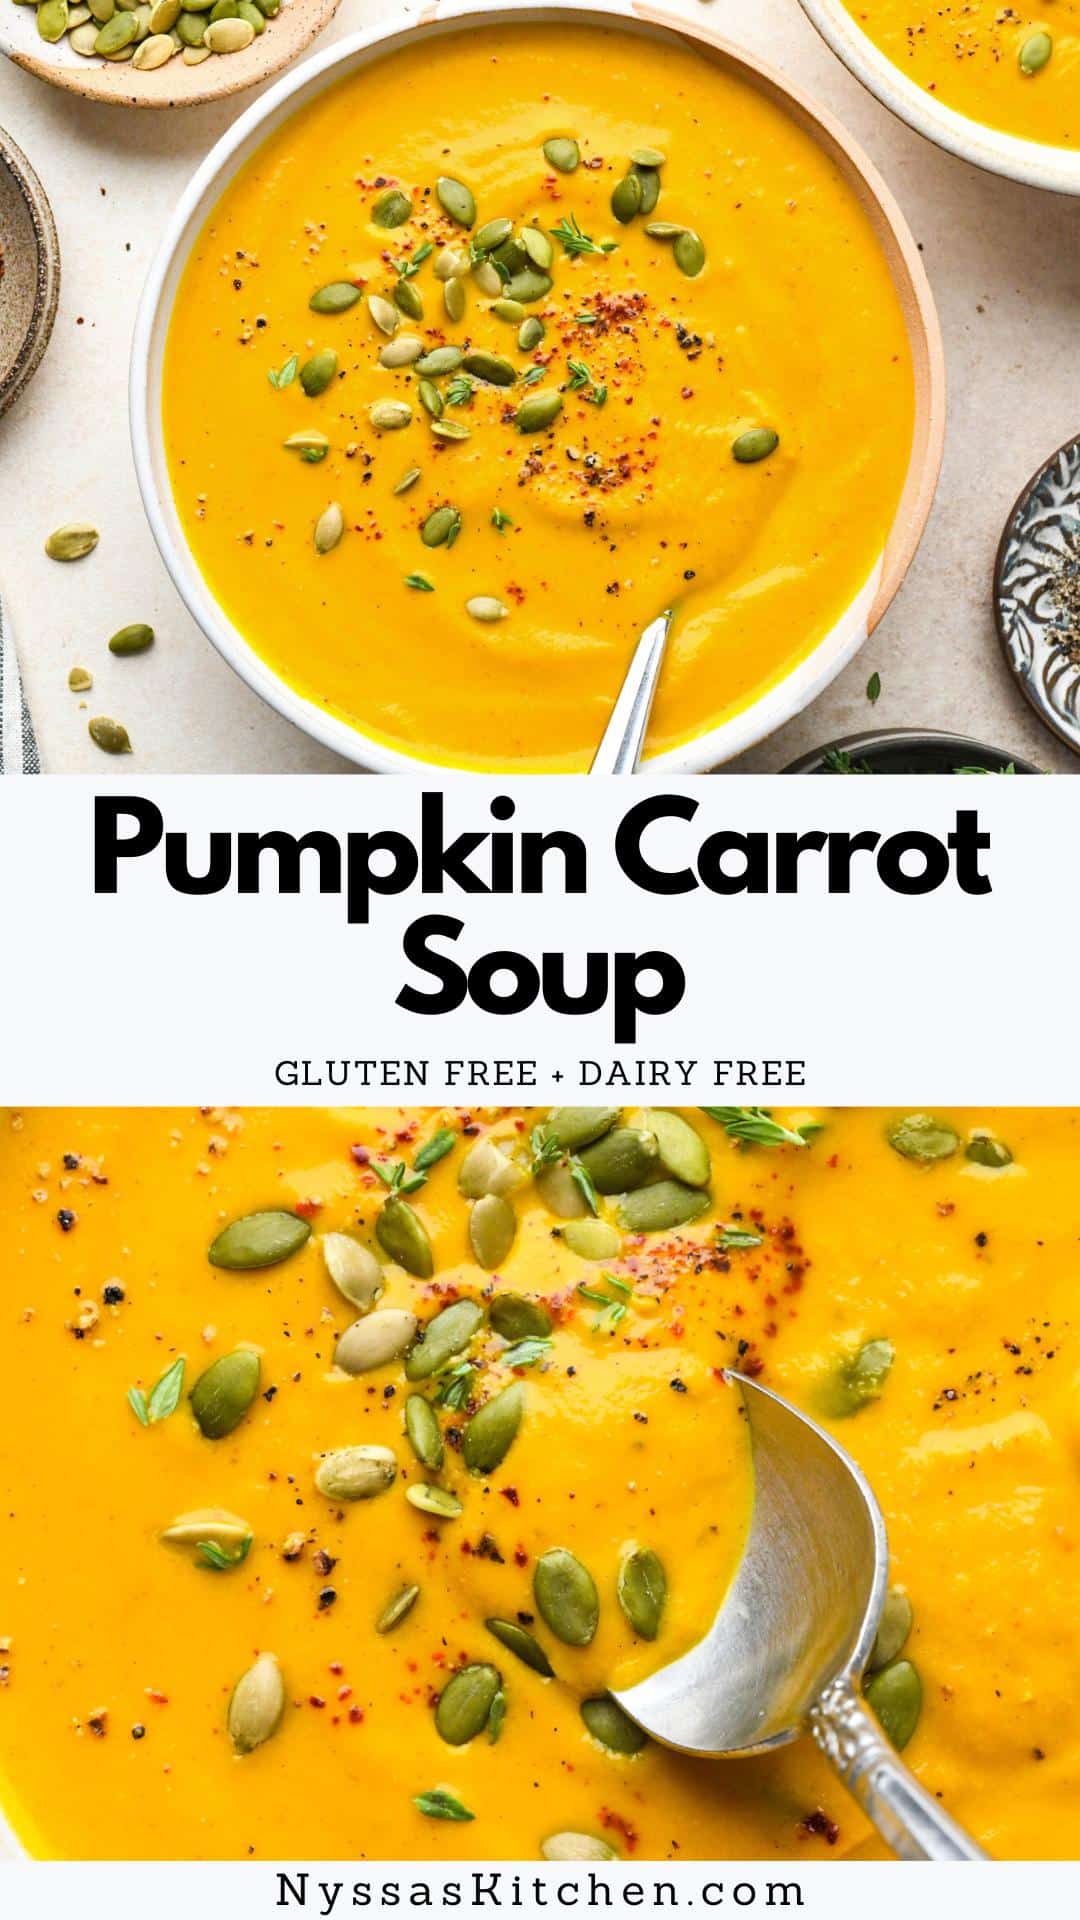 Silky smooth and perfectly spiced, this dairy free pumpkin carrot soup is just the thing to enjoy for lunch or dinner when the weather outside turns cool. It's easy to make and only takes about 30 minutes to prepare! Cozy, creamy, and full of flavor, it's sure to be a hit with adults and kids alike. It is gluten free, dairy free, vegan, vegetarian, Paleo friendly, and Whole30 compatible (with one small tweak!).